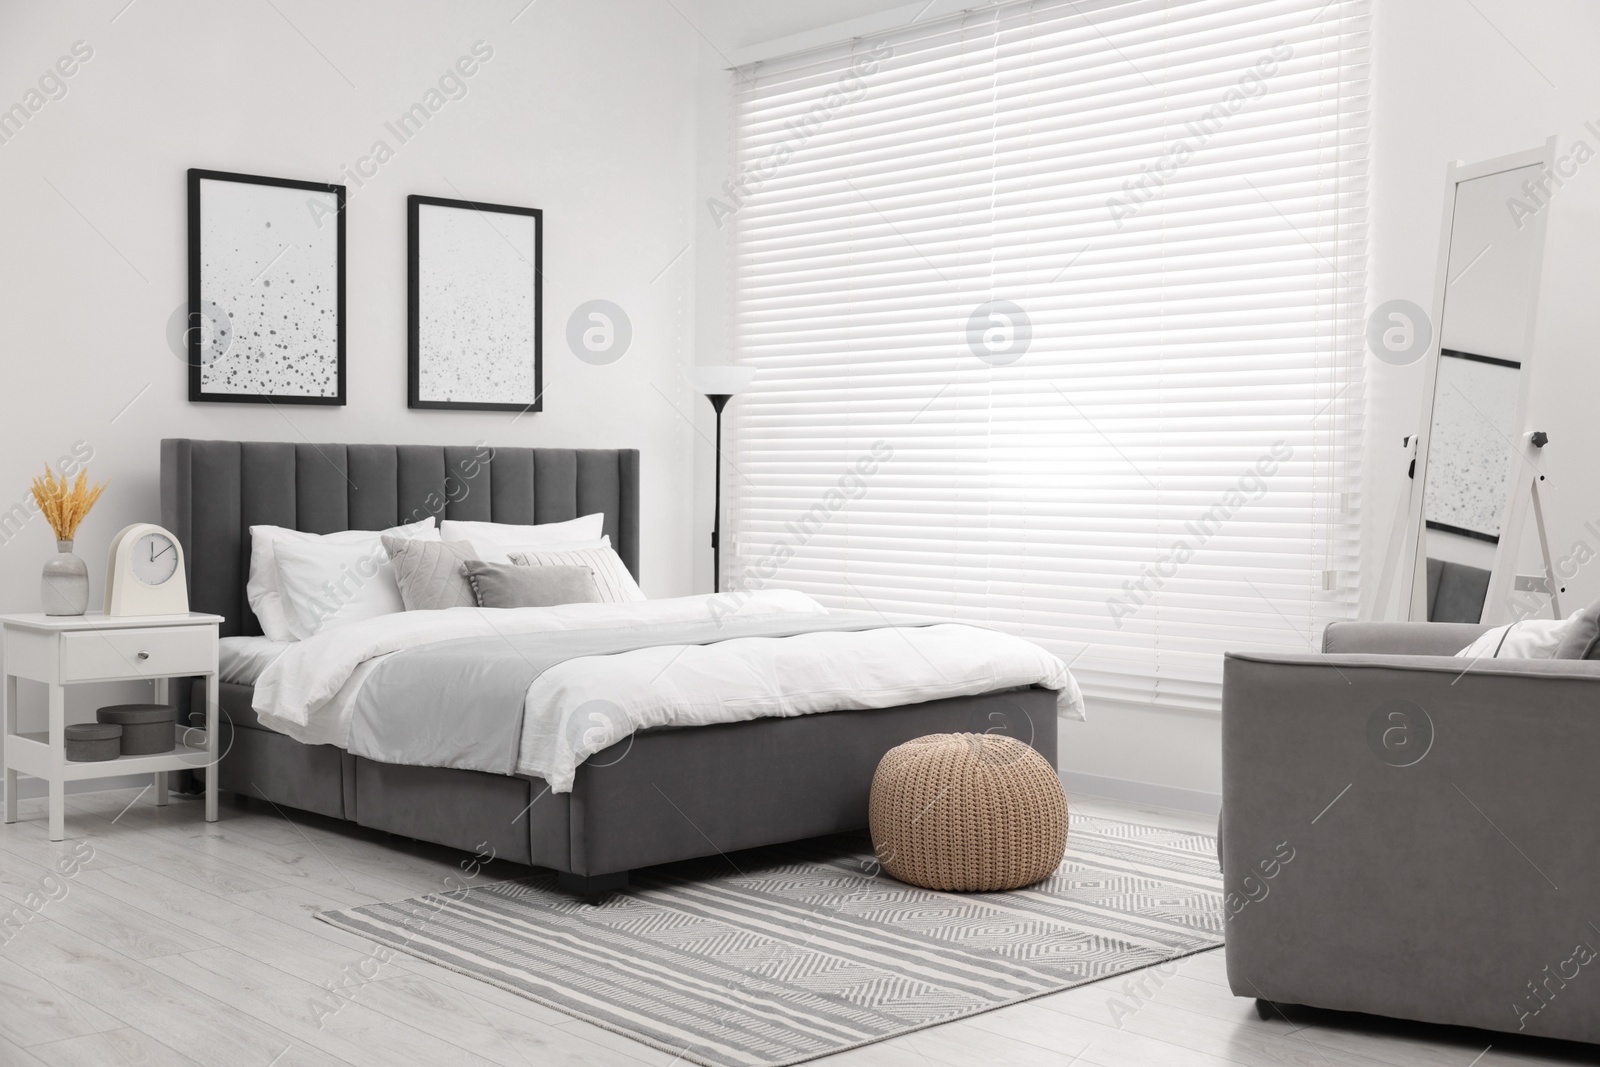 Photo of Stylish bedroom interior with large bed, bedside table and lamp